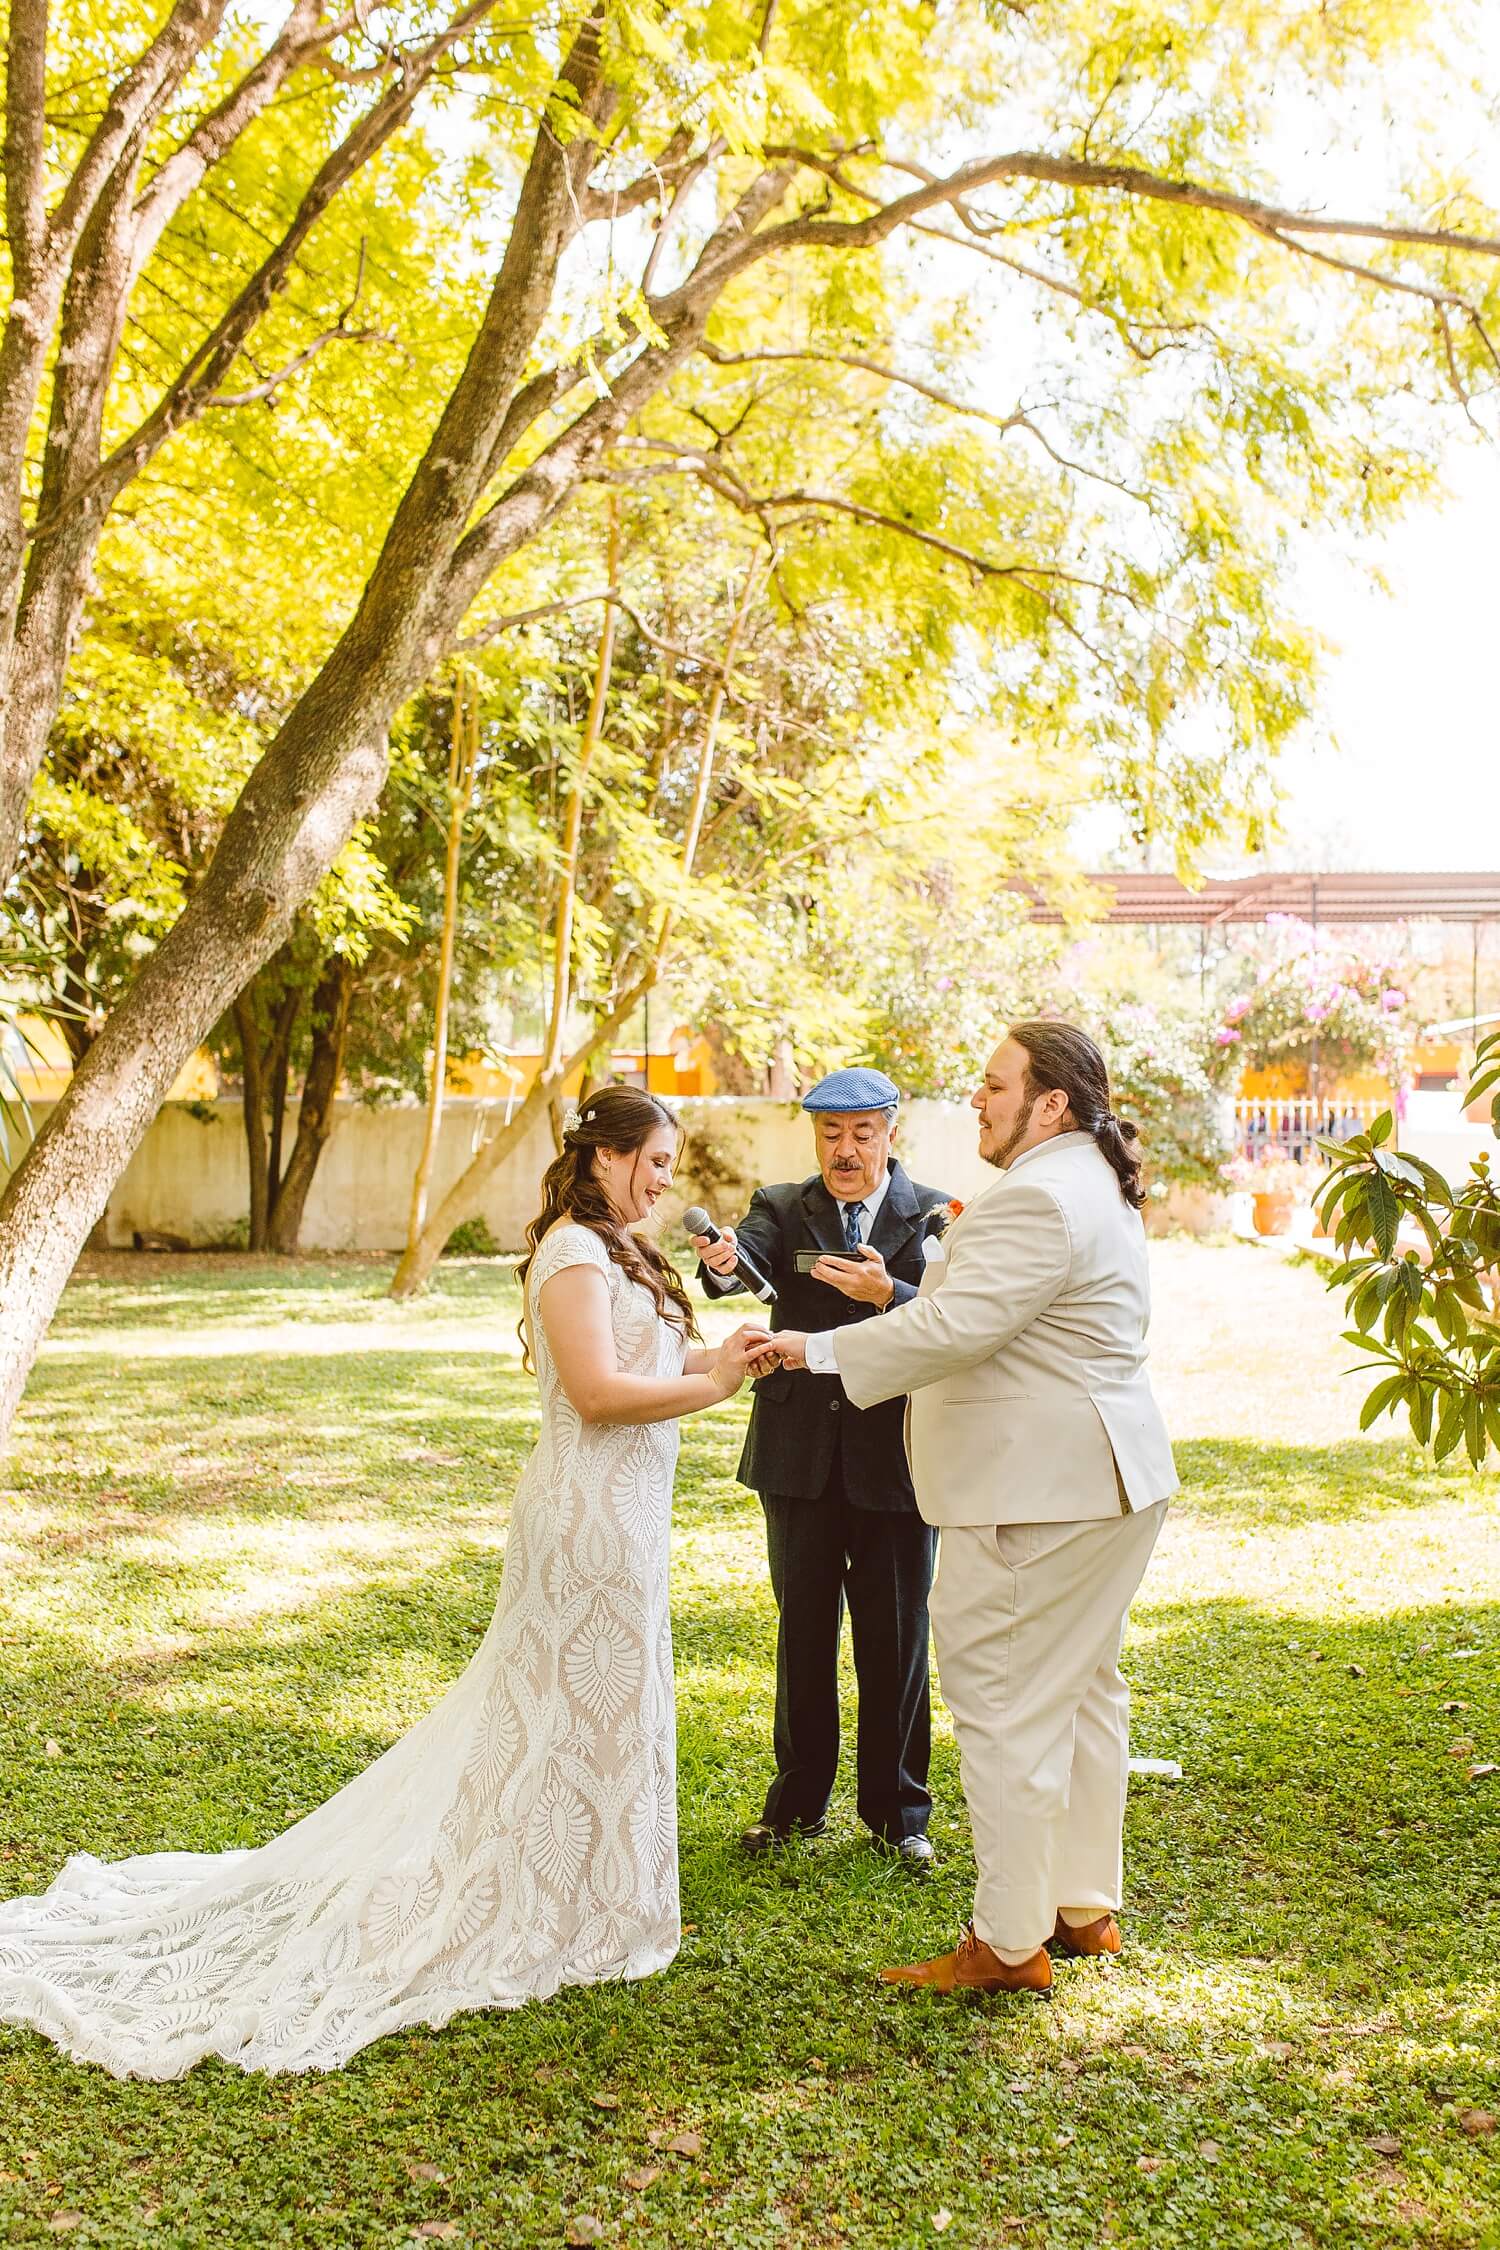 Bride and groom holding hands during ceremony in Mexico | Brooke Michelle Photo